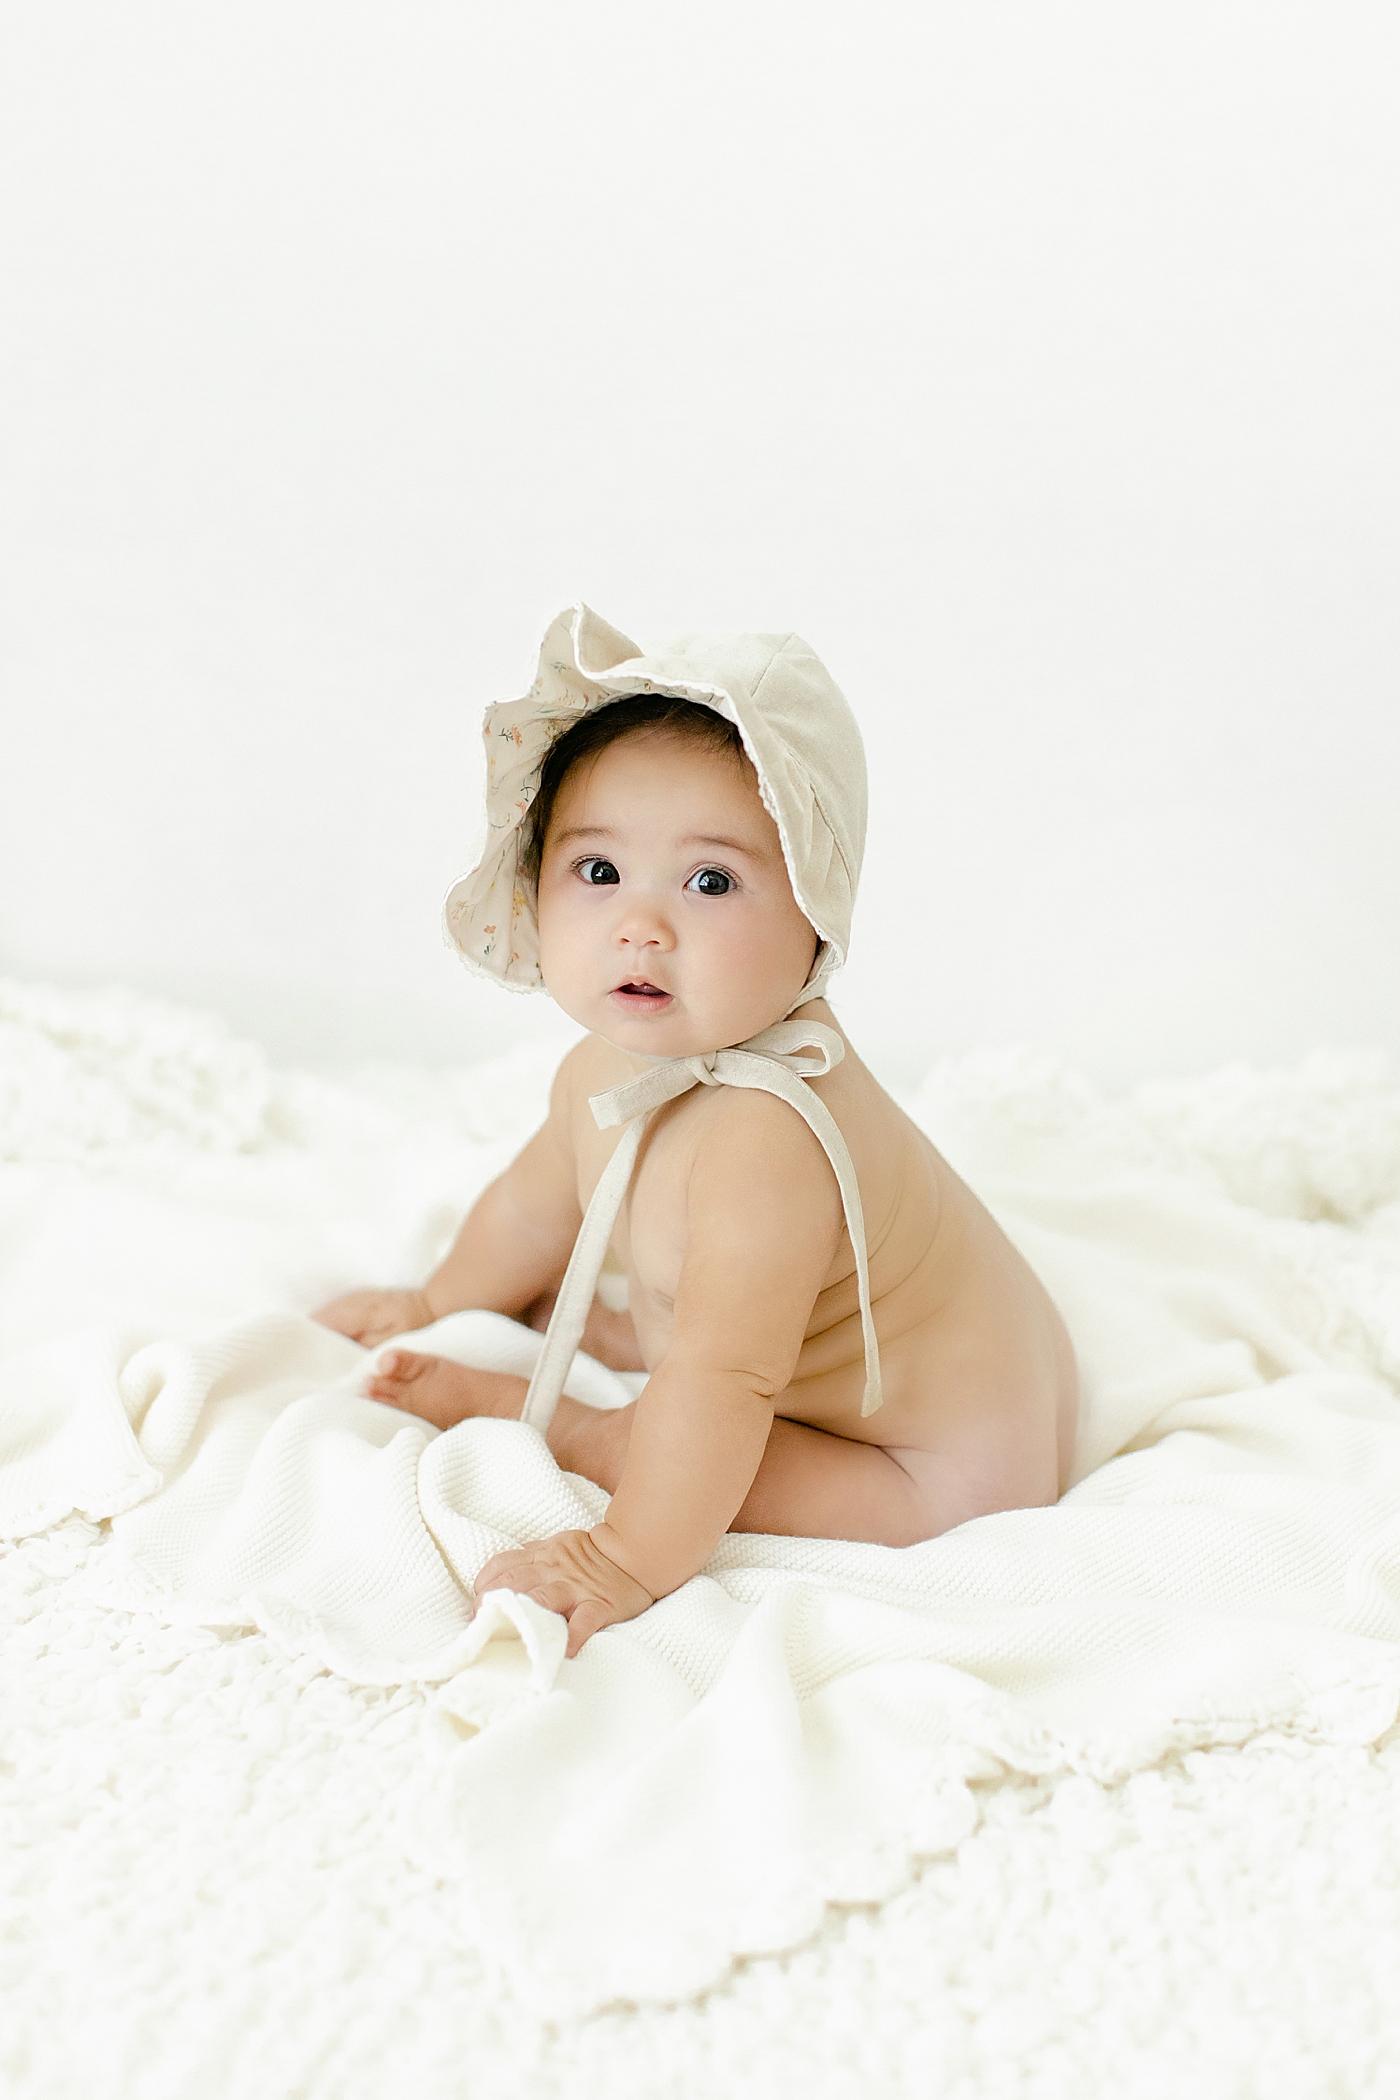 Baby girl in a bonnet | Image by Chrissy Winchester Photography